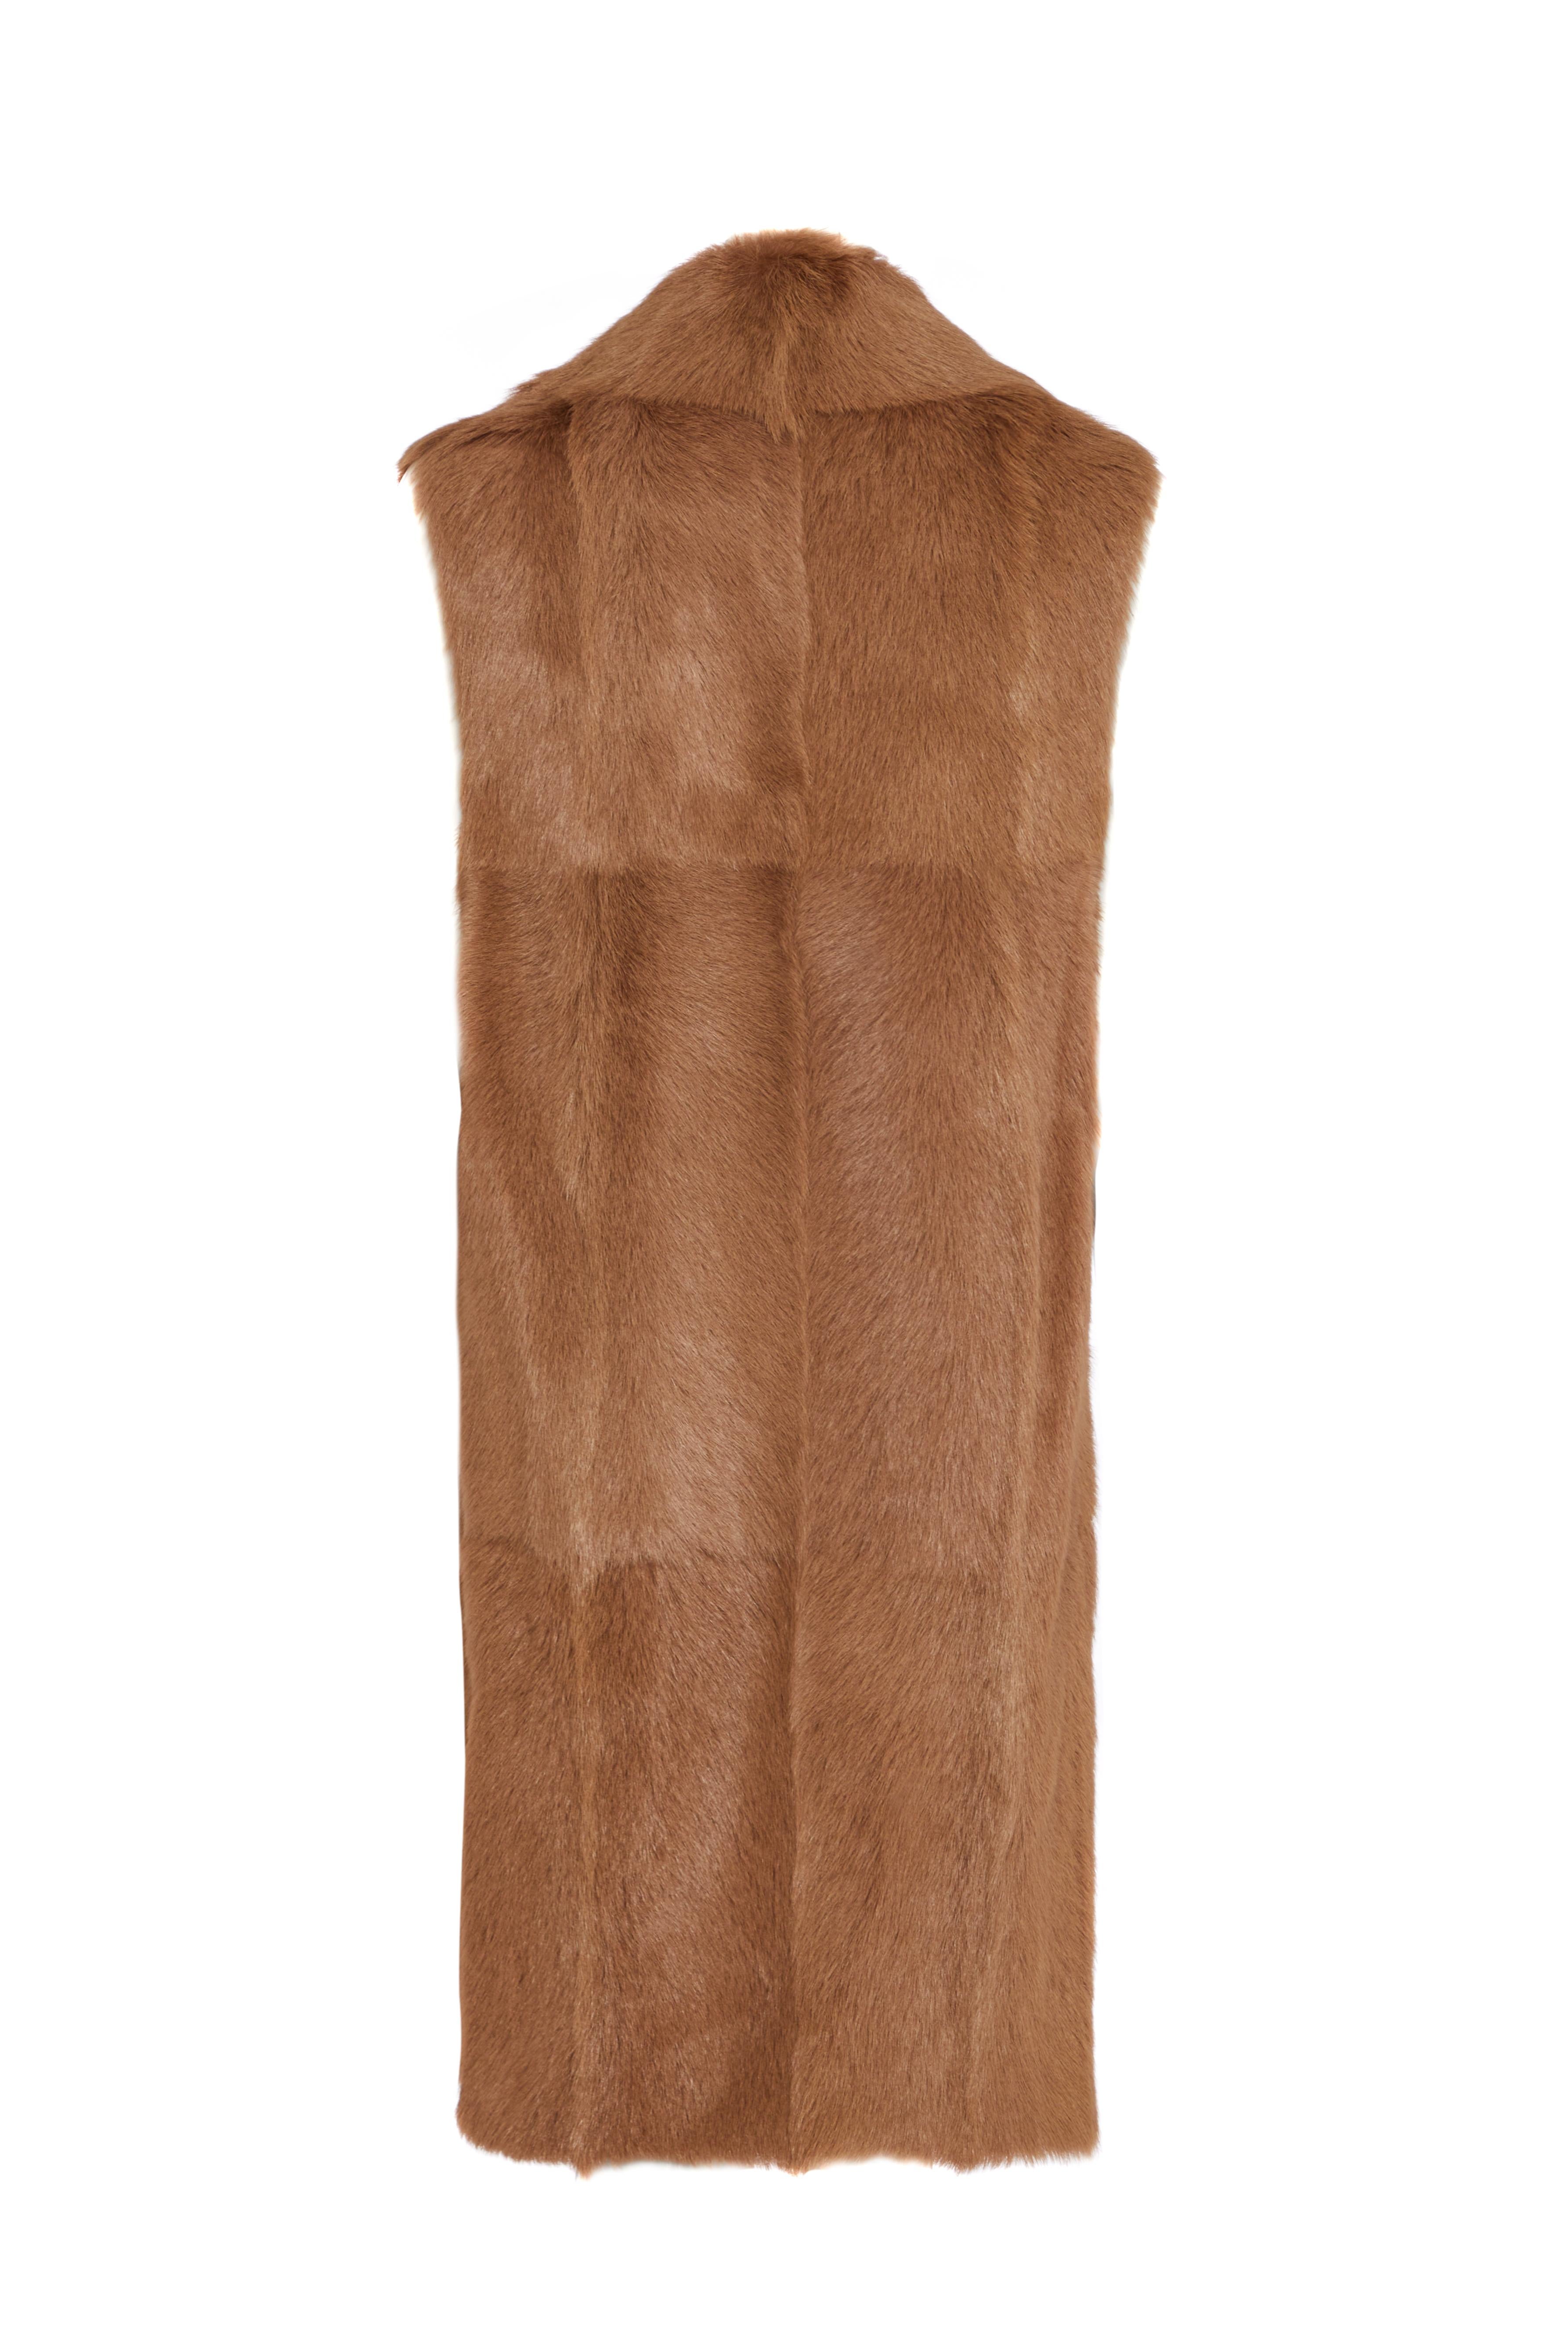 This is a beautiful goat fur gilet by Hermès. It features side slits and a small leather button closure at the front. Please inquire for any further details. 